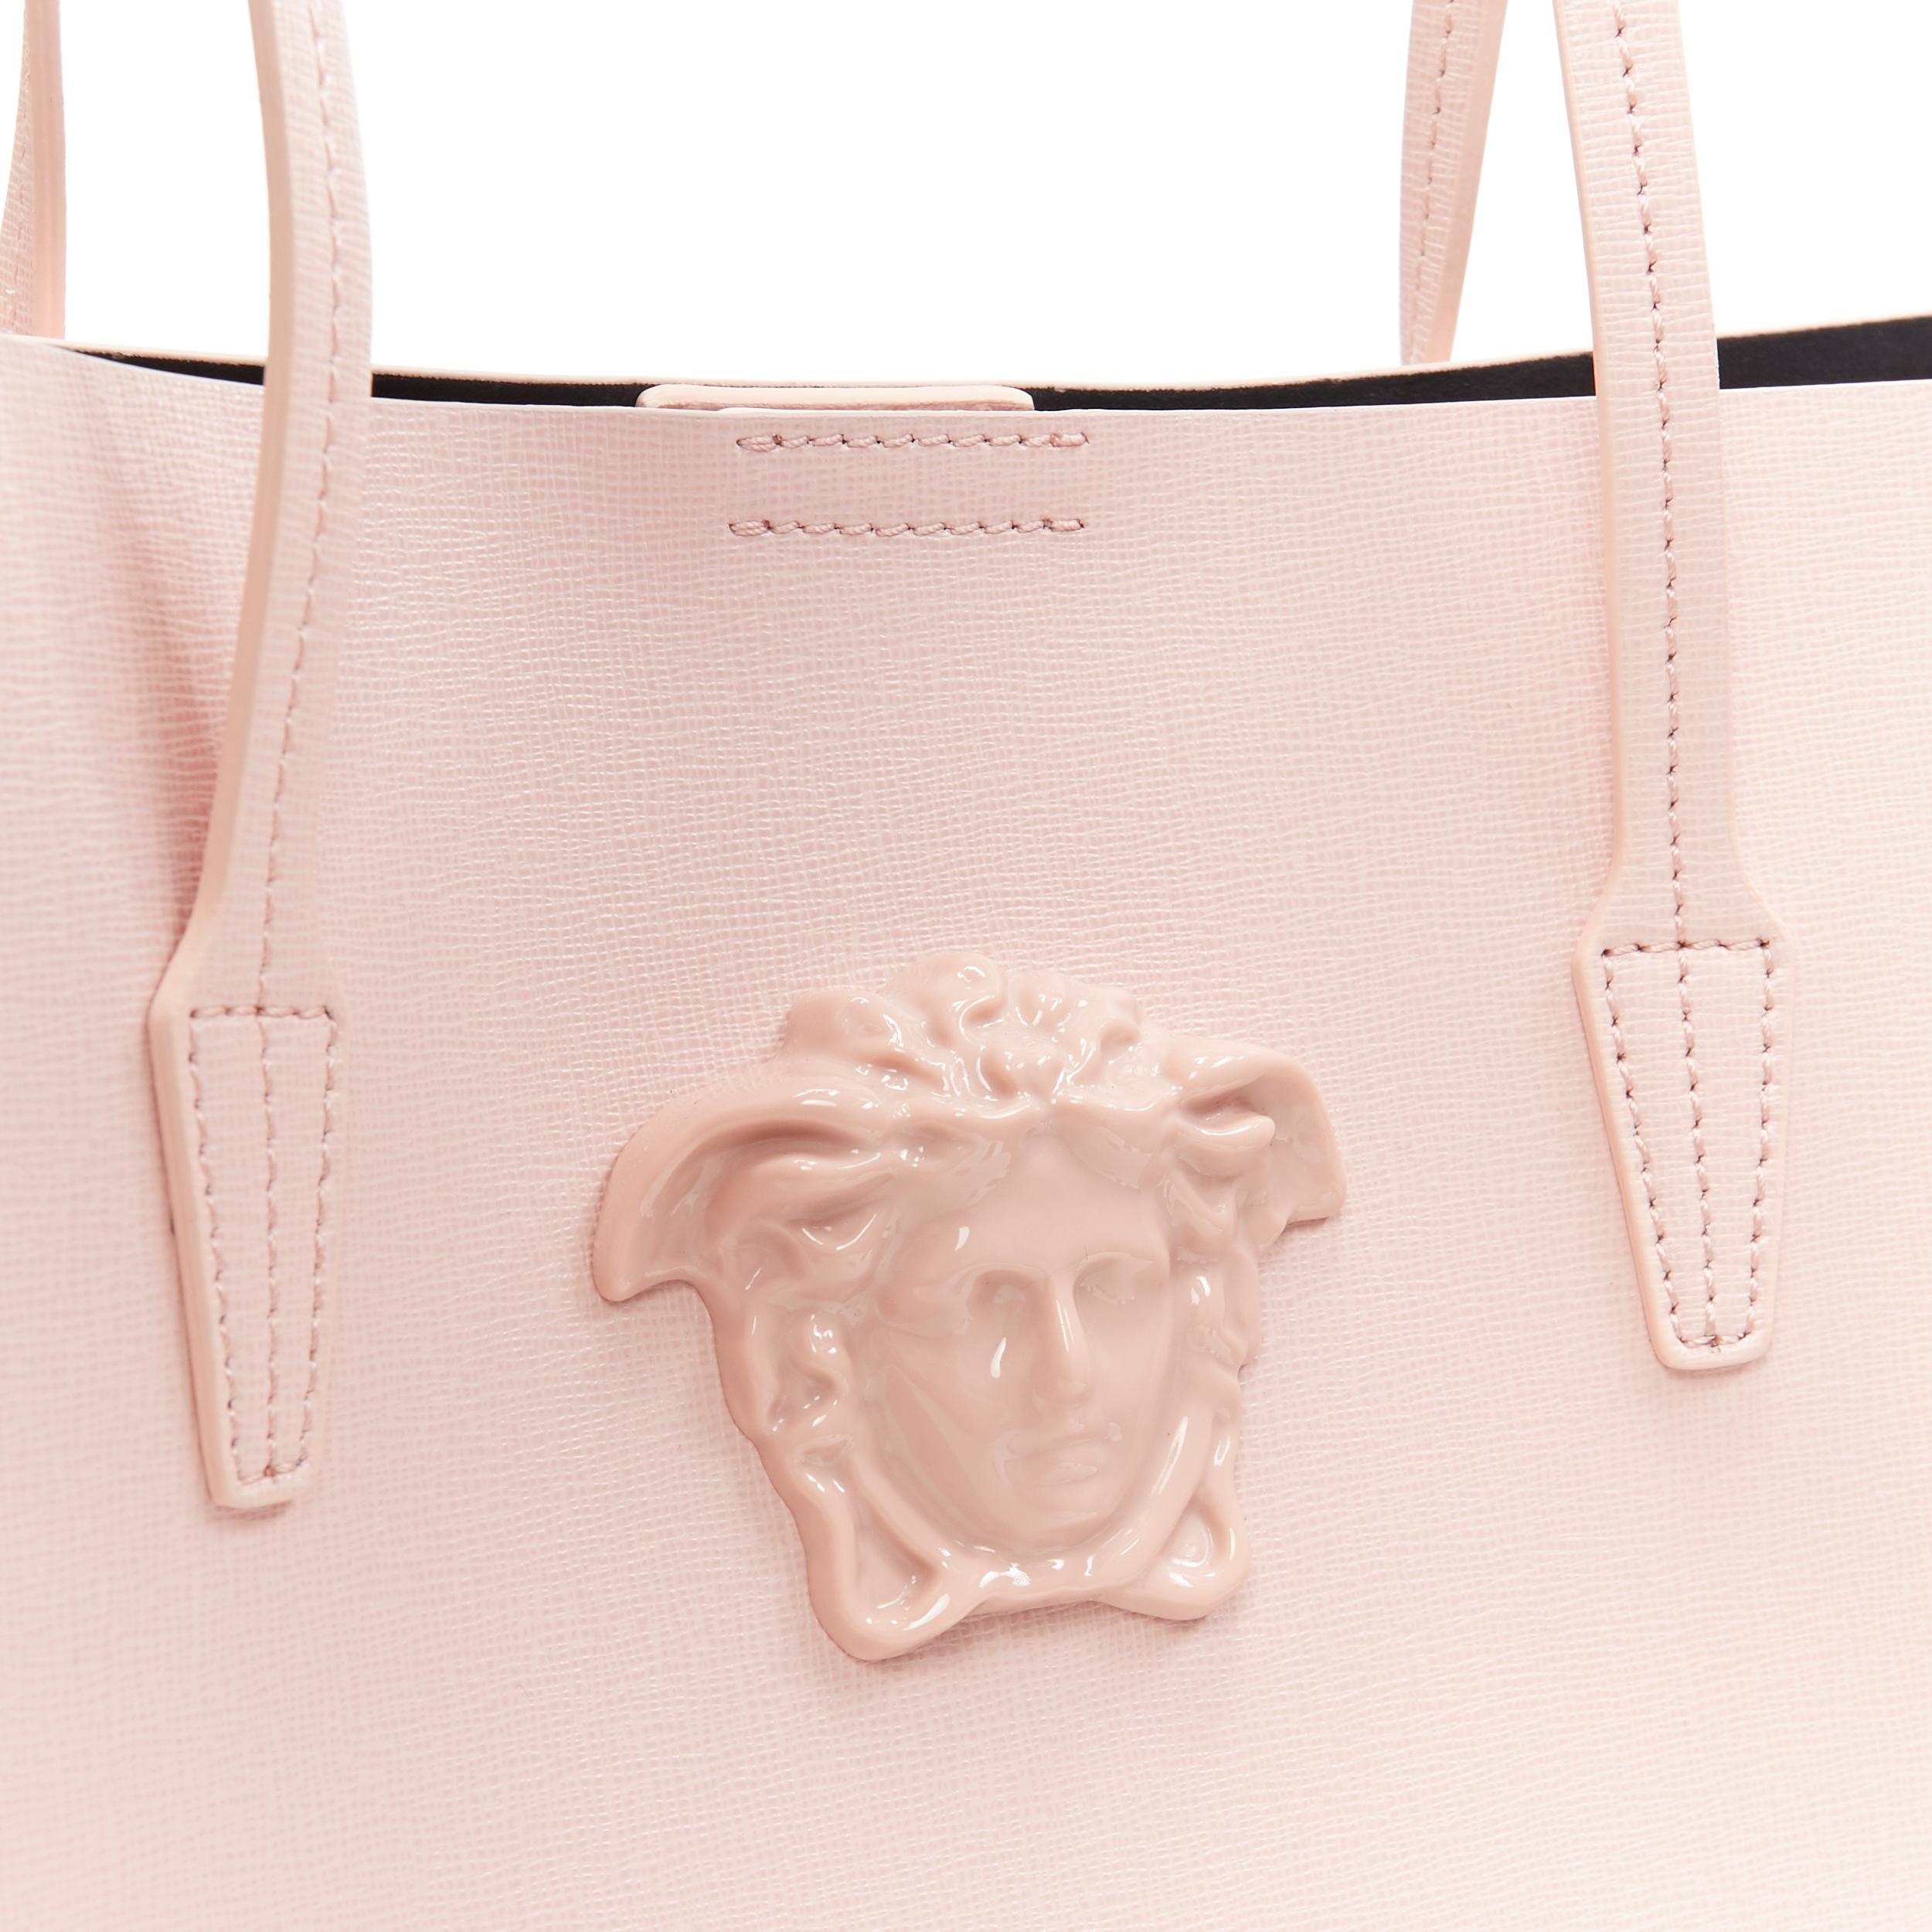 new VERSACE Palazzo Medusa light pink saffiano leather large neverfull tote bag 1